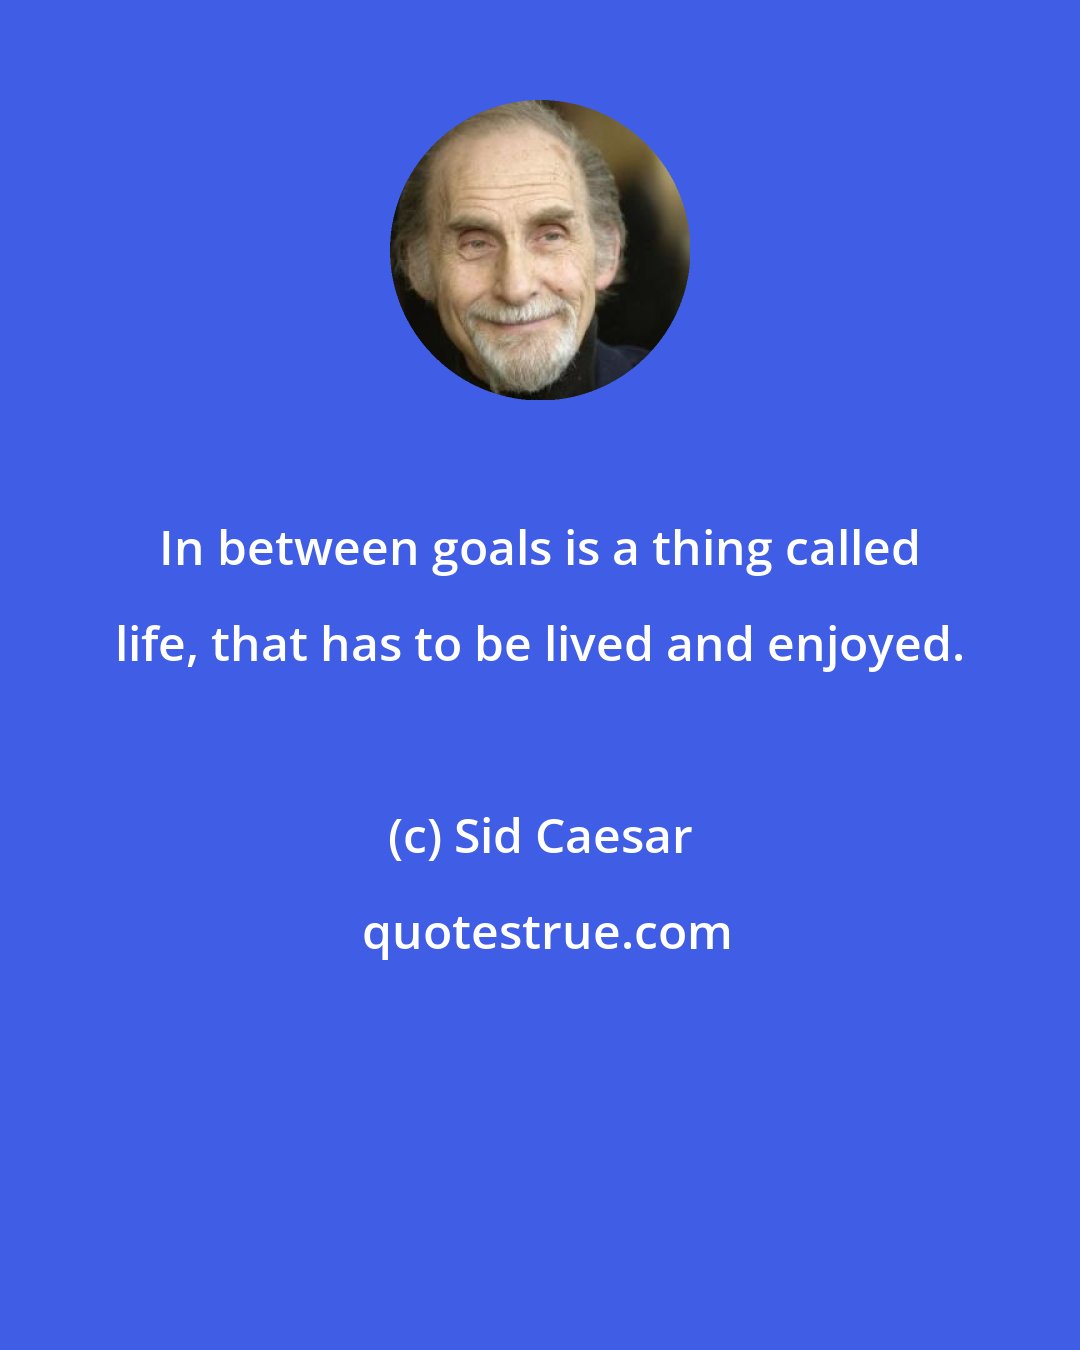 Sid Caesar: In between goals is a thing called life, that has to be lived and enjoyed.